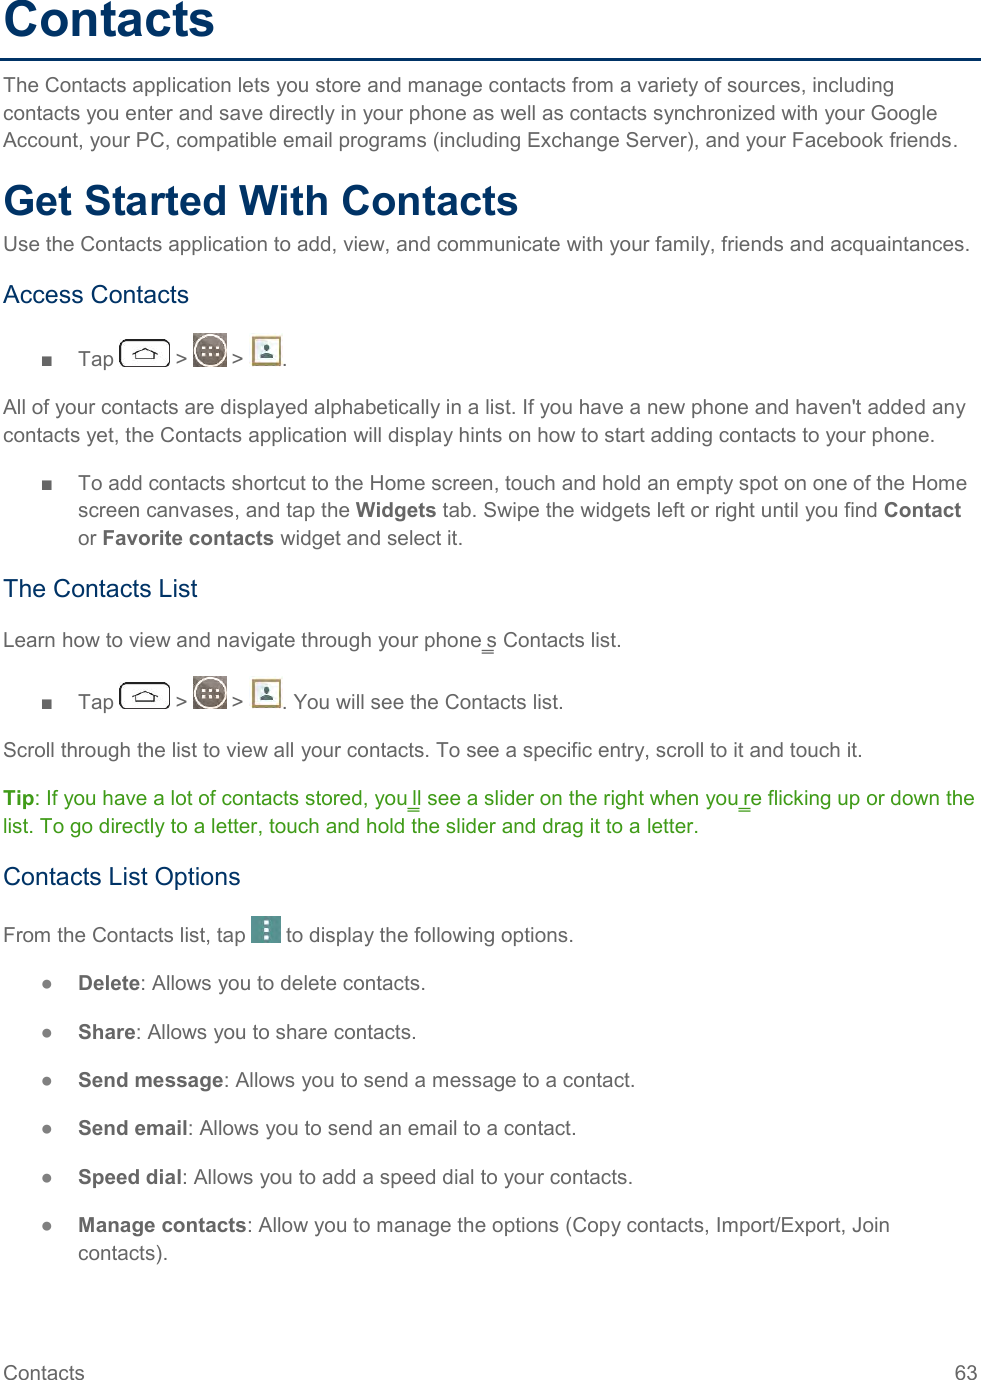 Contacts  63 Contacts The Contacts application lets you store and manage contacts from a variety of sources, including contacts you enter and save directly in your phone as well as contacts synchronized with your Google Account, your PC, compatible email programs (including Exchange Server), and your Facebook friends. Get Started With Contacts Use the Contacts application to add, view, and communicate with your family, friends and acquaintances. Access Contacts ■  Tap   &gt;   &gt;  . All of your contacts are displayed alphabetically in a list. If you have a new phone and haven&apos;t added any contacts yet, the Contacts application will display hints on how to start adding contacts to your phone. ■  To add contacts shortcut to the Home screen, touch and hold an empty spot on one of the Home screen canvases, and tap the Widgets tab. Swipe the widgets left or right until you find Contact or Favorite contacts widget and select it. The Contacts List Learn how to view and navigate through your phone‗s Contacts list. ■  Tap   &gt;   &gt;  . You will see the Contacts list. Scroll through the list to view all your contacts. To see a specific entry, scroll to it and touch it. Tip: If you have a lot of contacts stored, you‗ll see a slider on the right when you‗re flicking up or down the list. To go directly to a letter, touch and hold the slider and drag it to a letter. Contacts List Options From the Contacts list, tap   to display the following options. ●  Delete: Allows you to delete contacts. ●  Share: Allows you to share contacts. ●  Send message: Allows you to send a message to a contact. ●  Send email: Allows you to send an email to a contact. ●  Speed dial: Allows you to add a speed dial to your contacts. ●  Manage contacts: Allow you to manage the options (Copy contacts, Import/Export, Join contacts). 